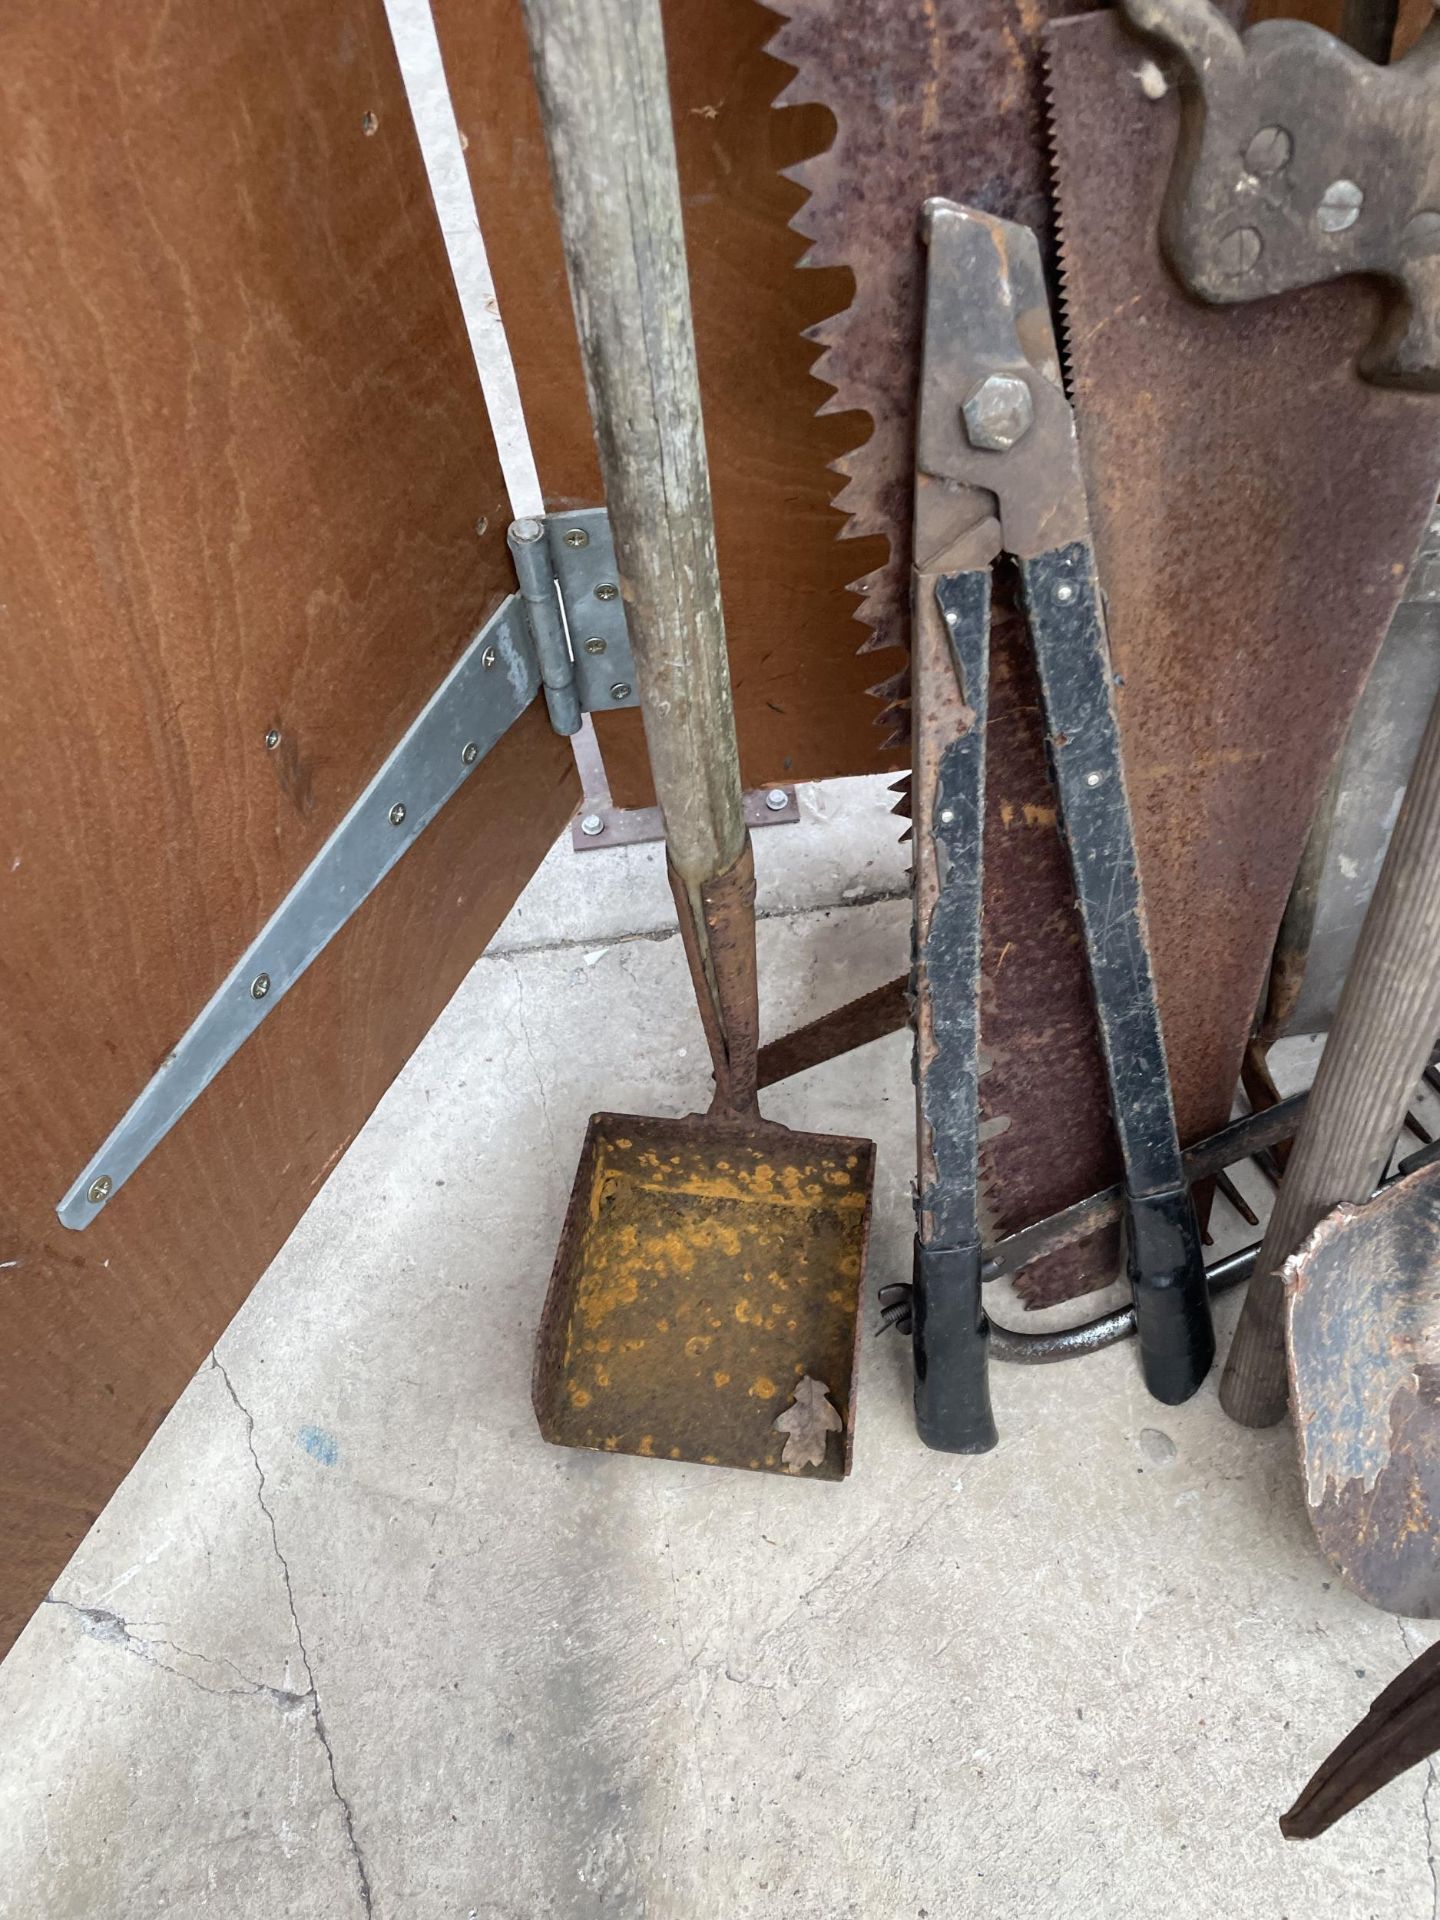 A LARGE ASSORTMENT OF VINTAGE GARDEN TOOLS TO INCLUDE A SLEDGE HAMMER, SPADES AND LARGE SAWS ETC - Image 7 of 7